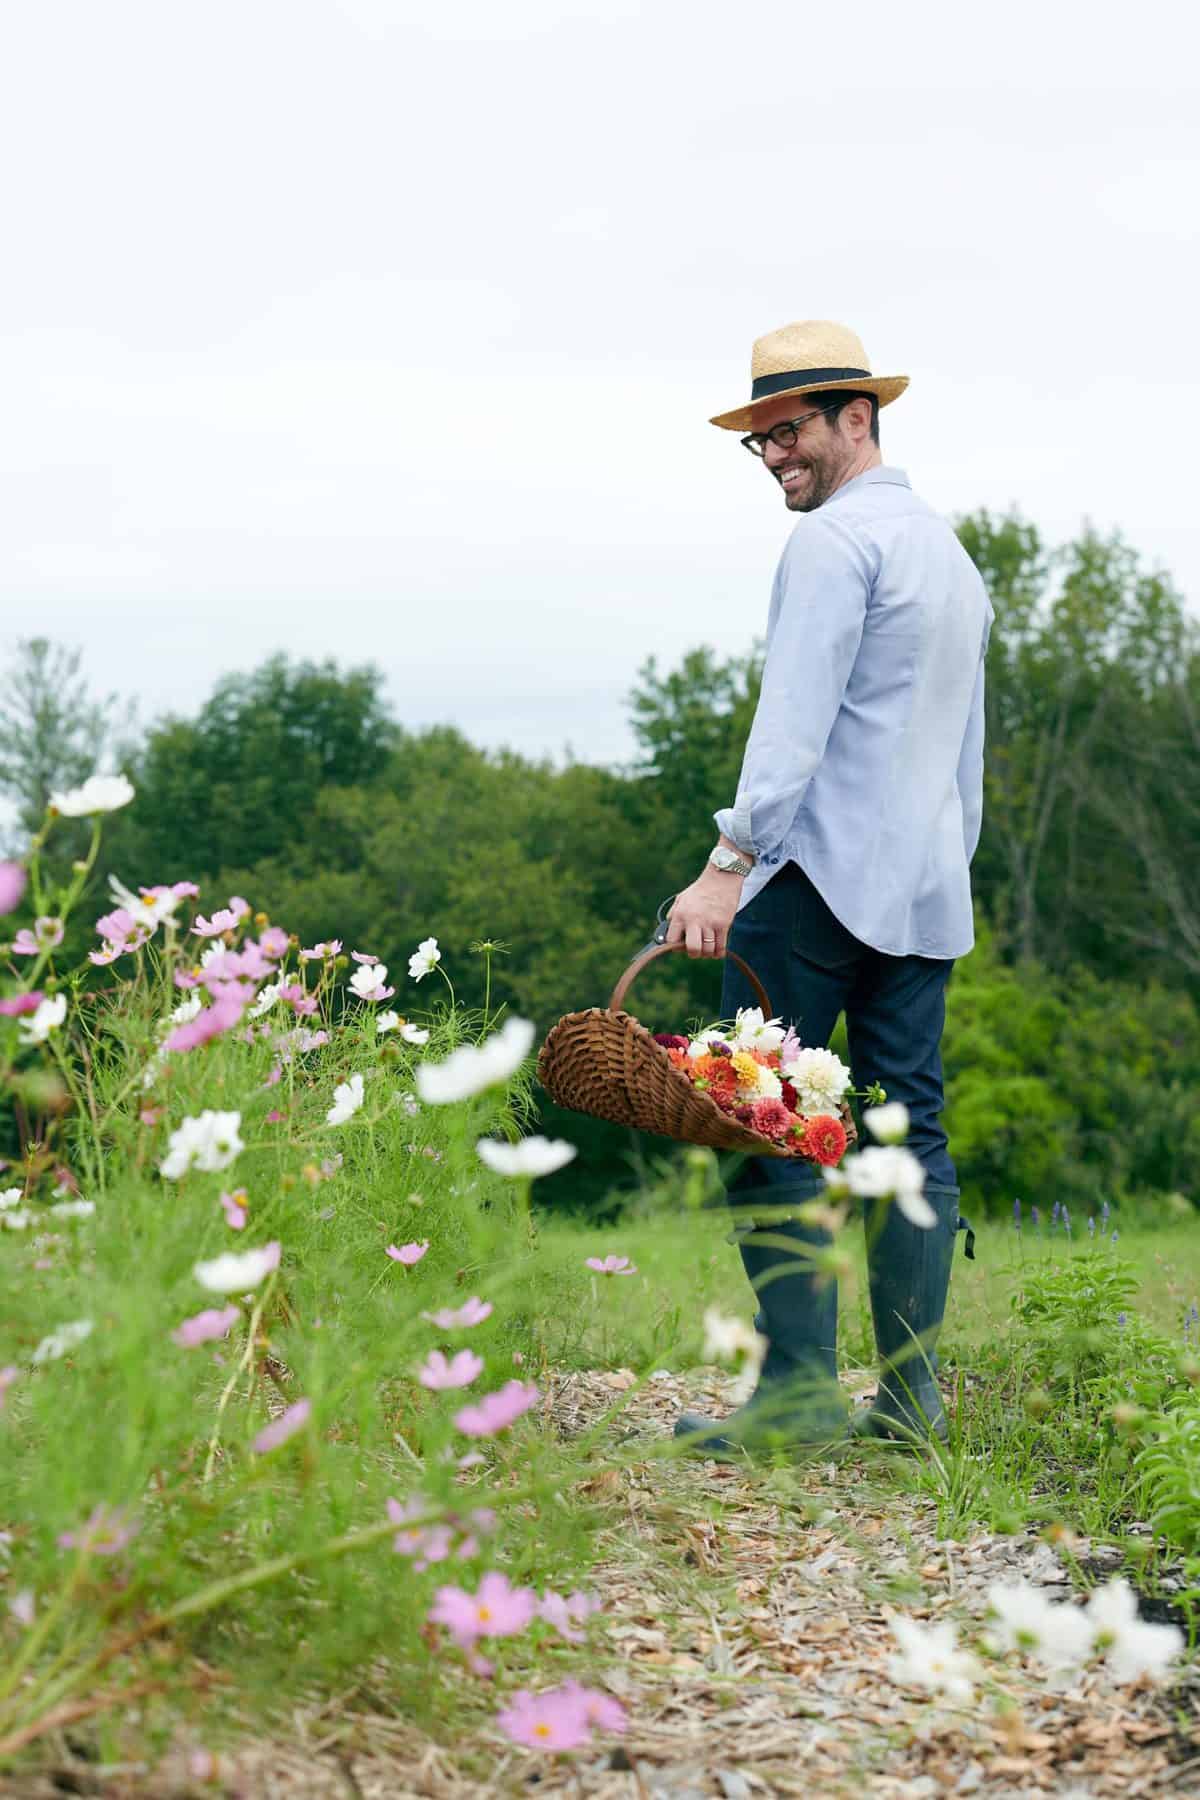 John Kanell smiling and walking in a field of flowers while holding a basket of cut flowers.